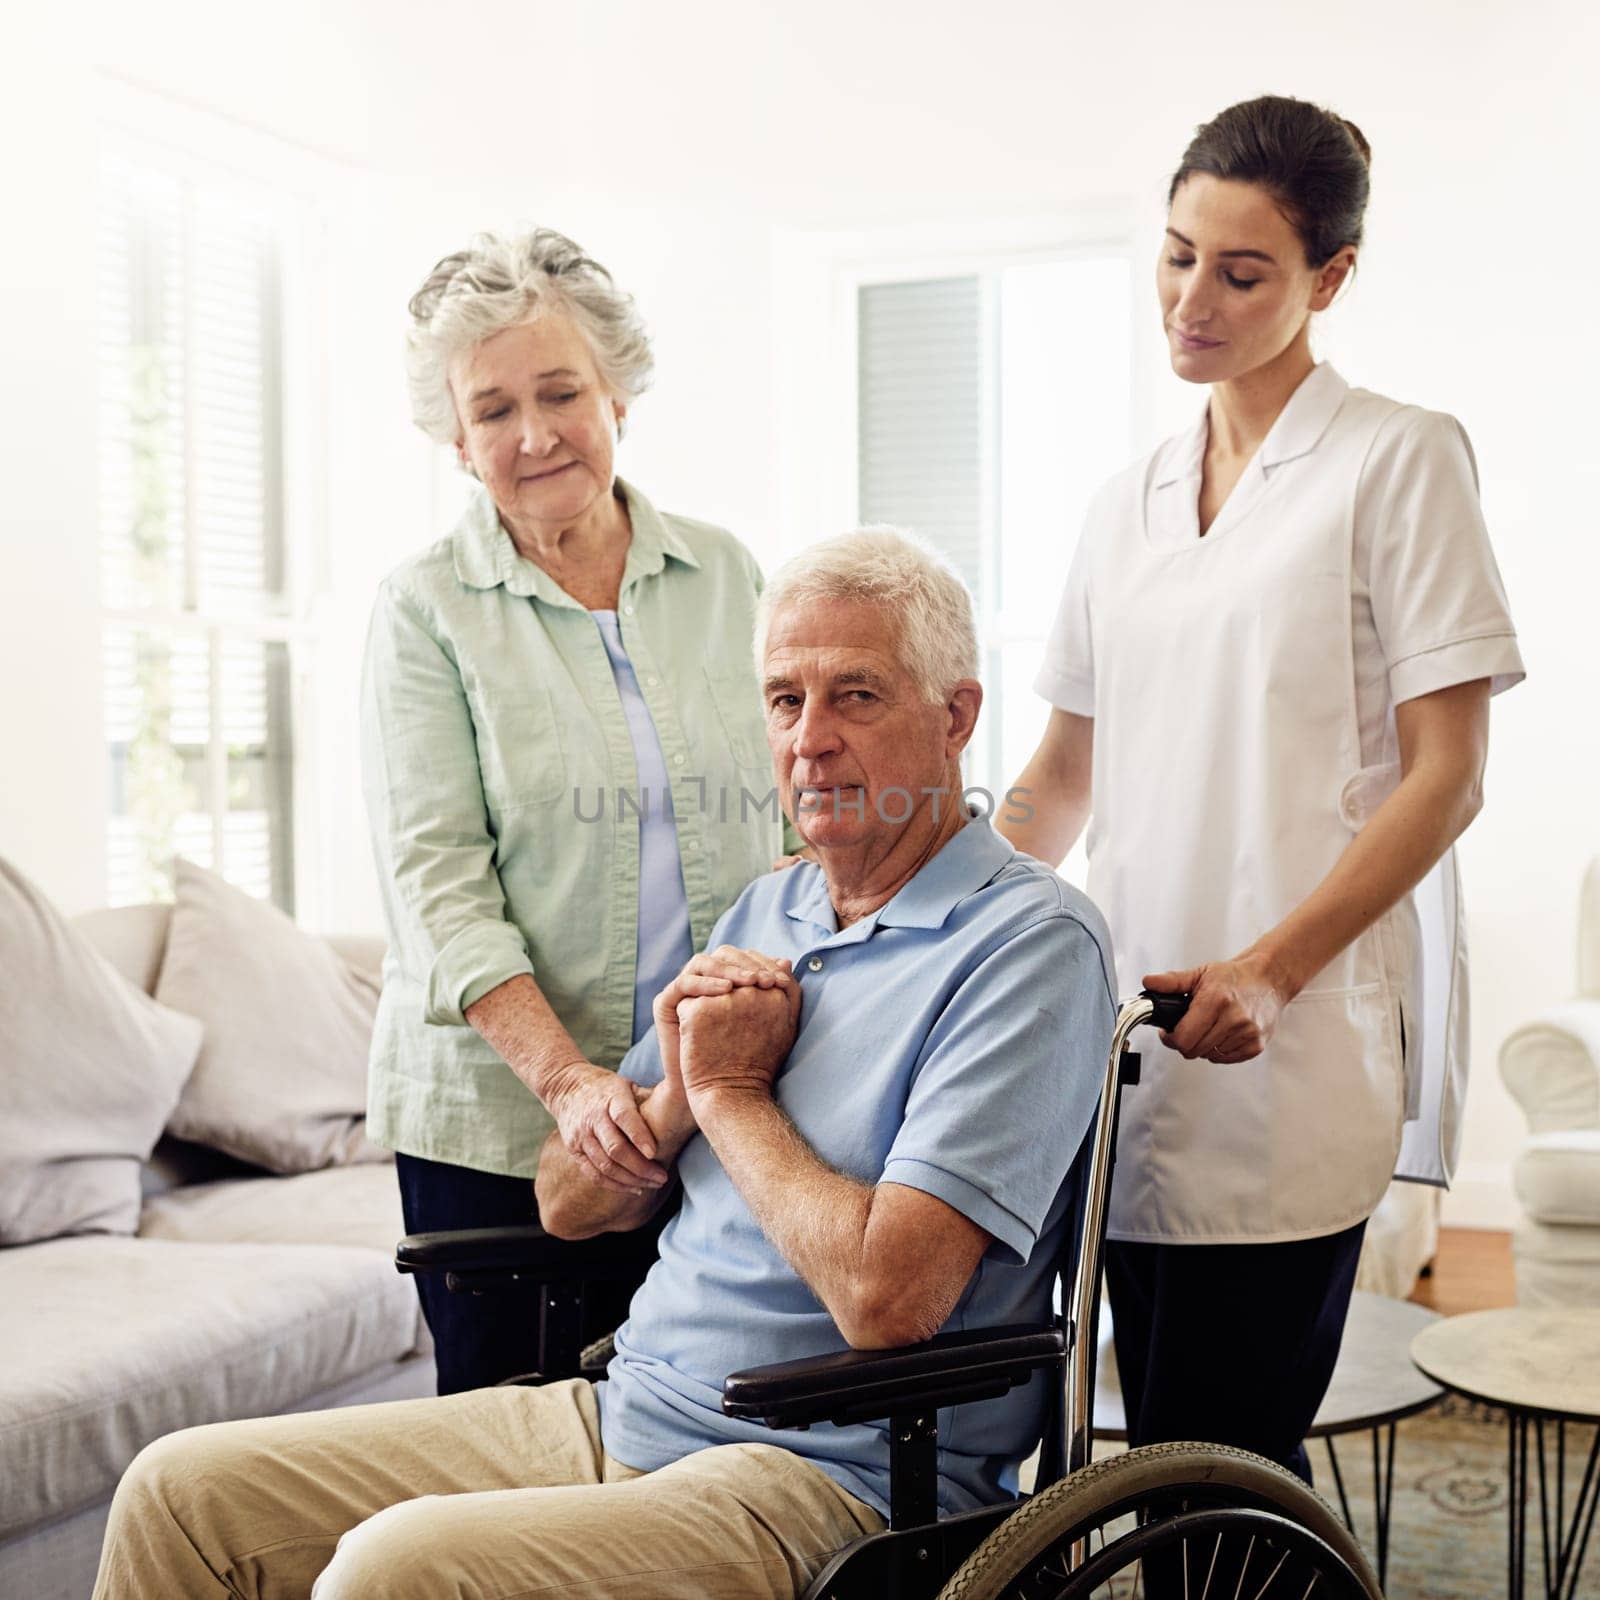 Portrait of old man in wheelchair with wife and caregiver at nursing home for disability and rehabilitation. Healthcare, recovery and senior couple with nurse together in house or retirement center